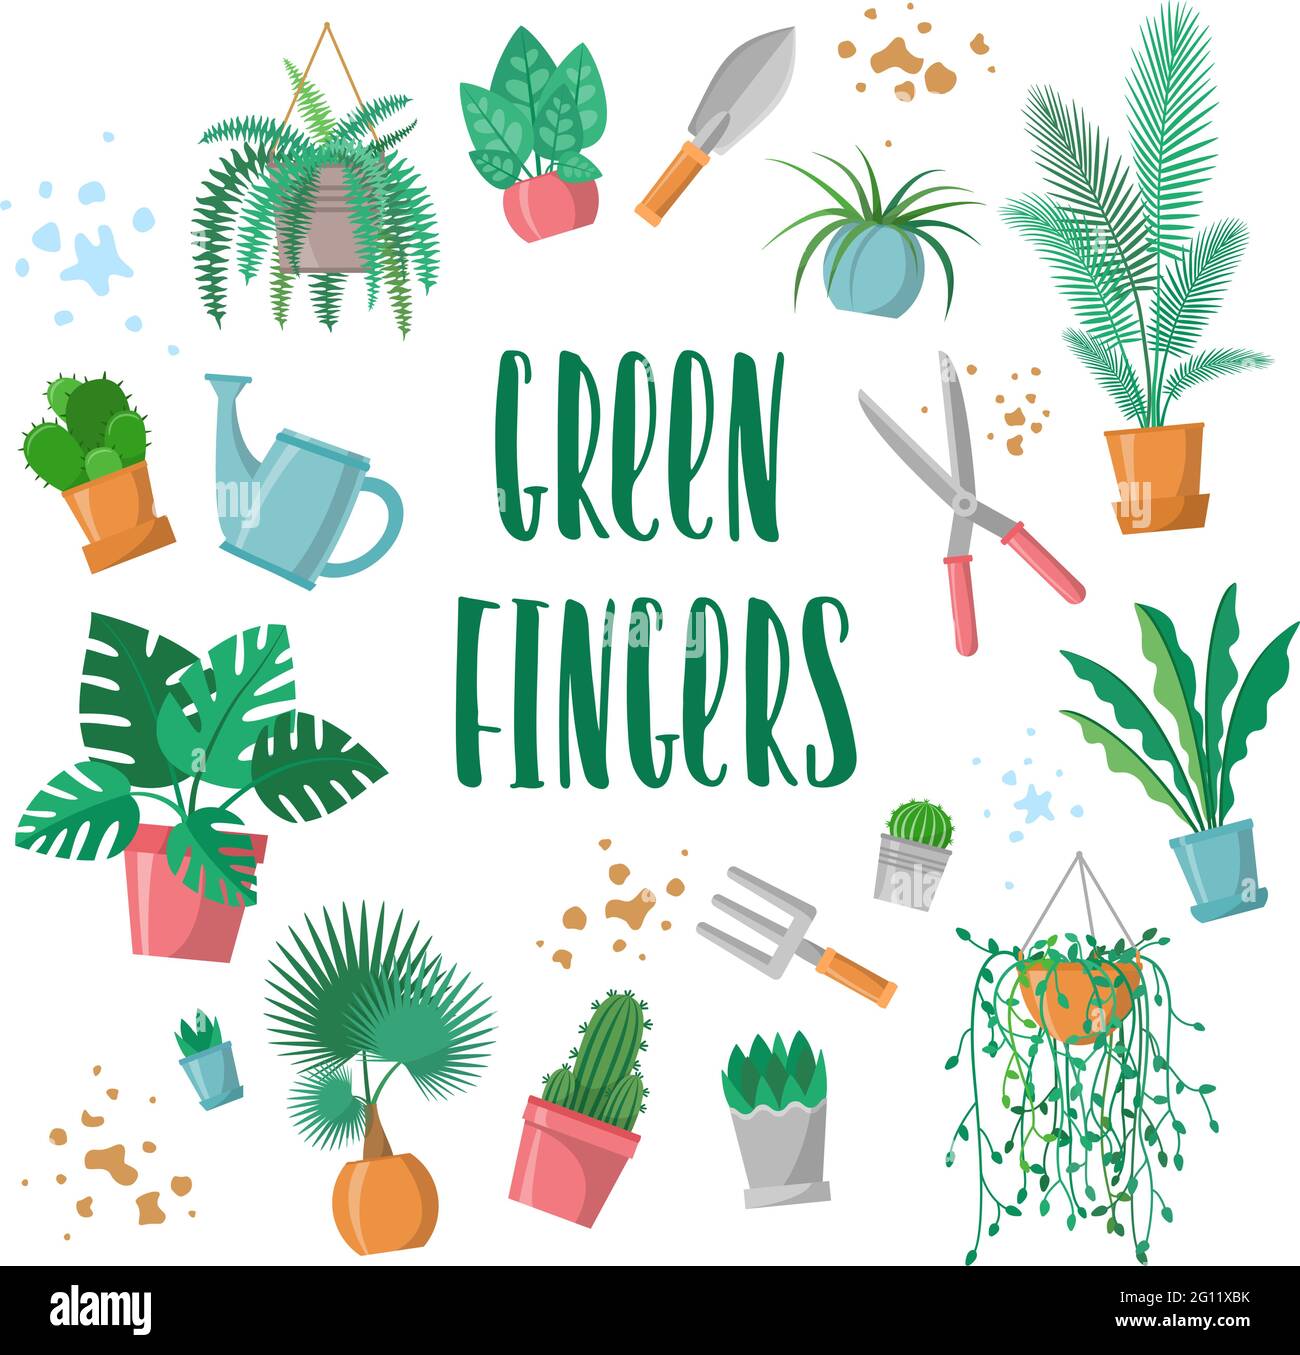 Green fingers sign with garden tools, home plants and mud, phrase for plants lovers, scissors, fork, trowel, watering pot, palm, cactus, fern, vector Stock Vector